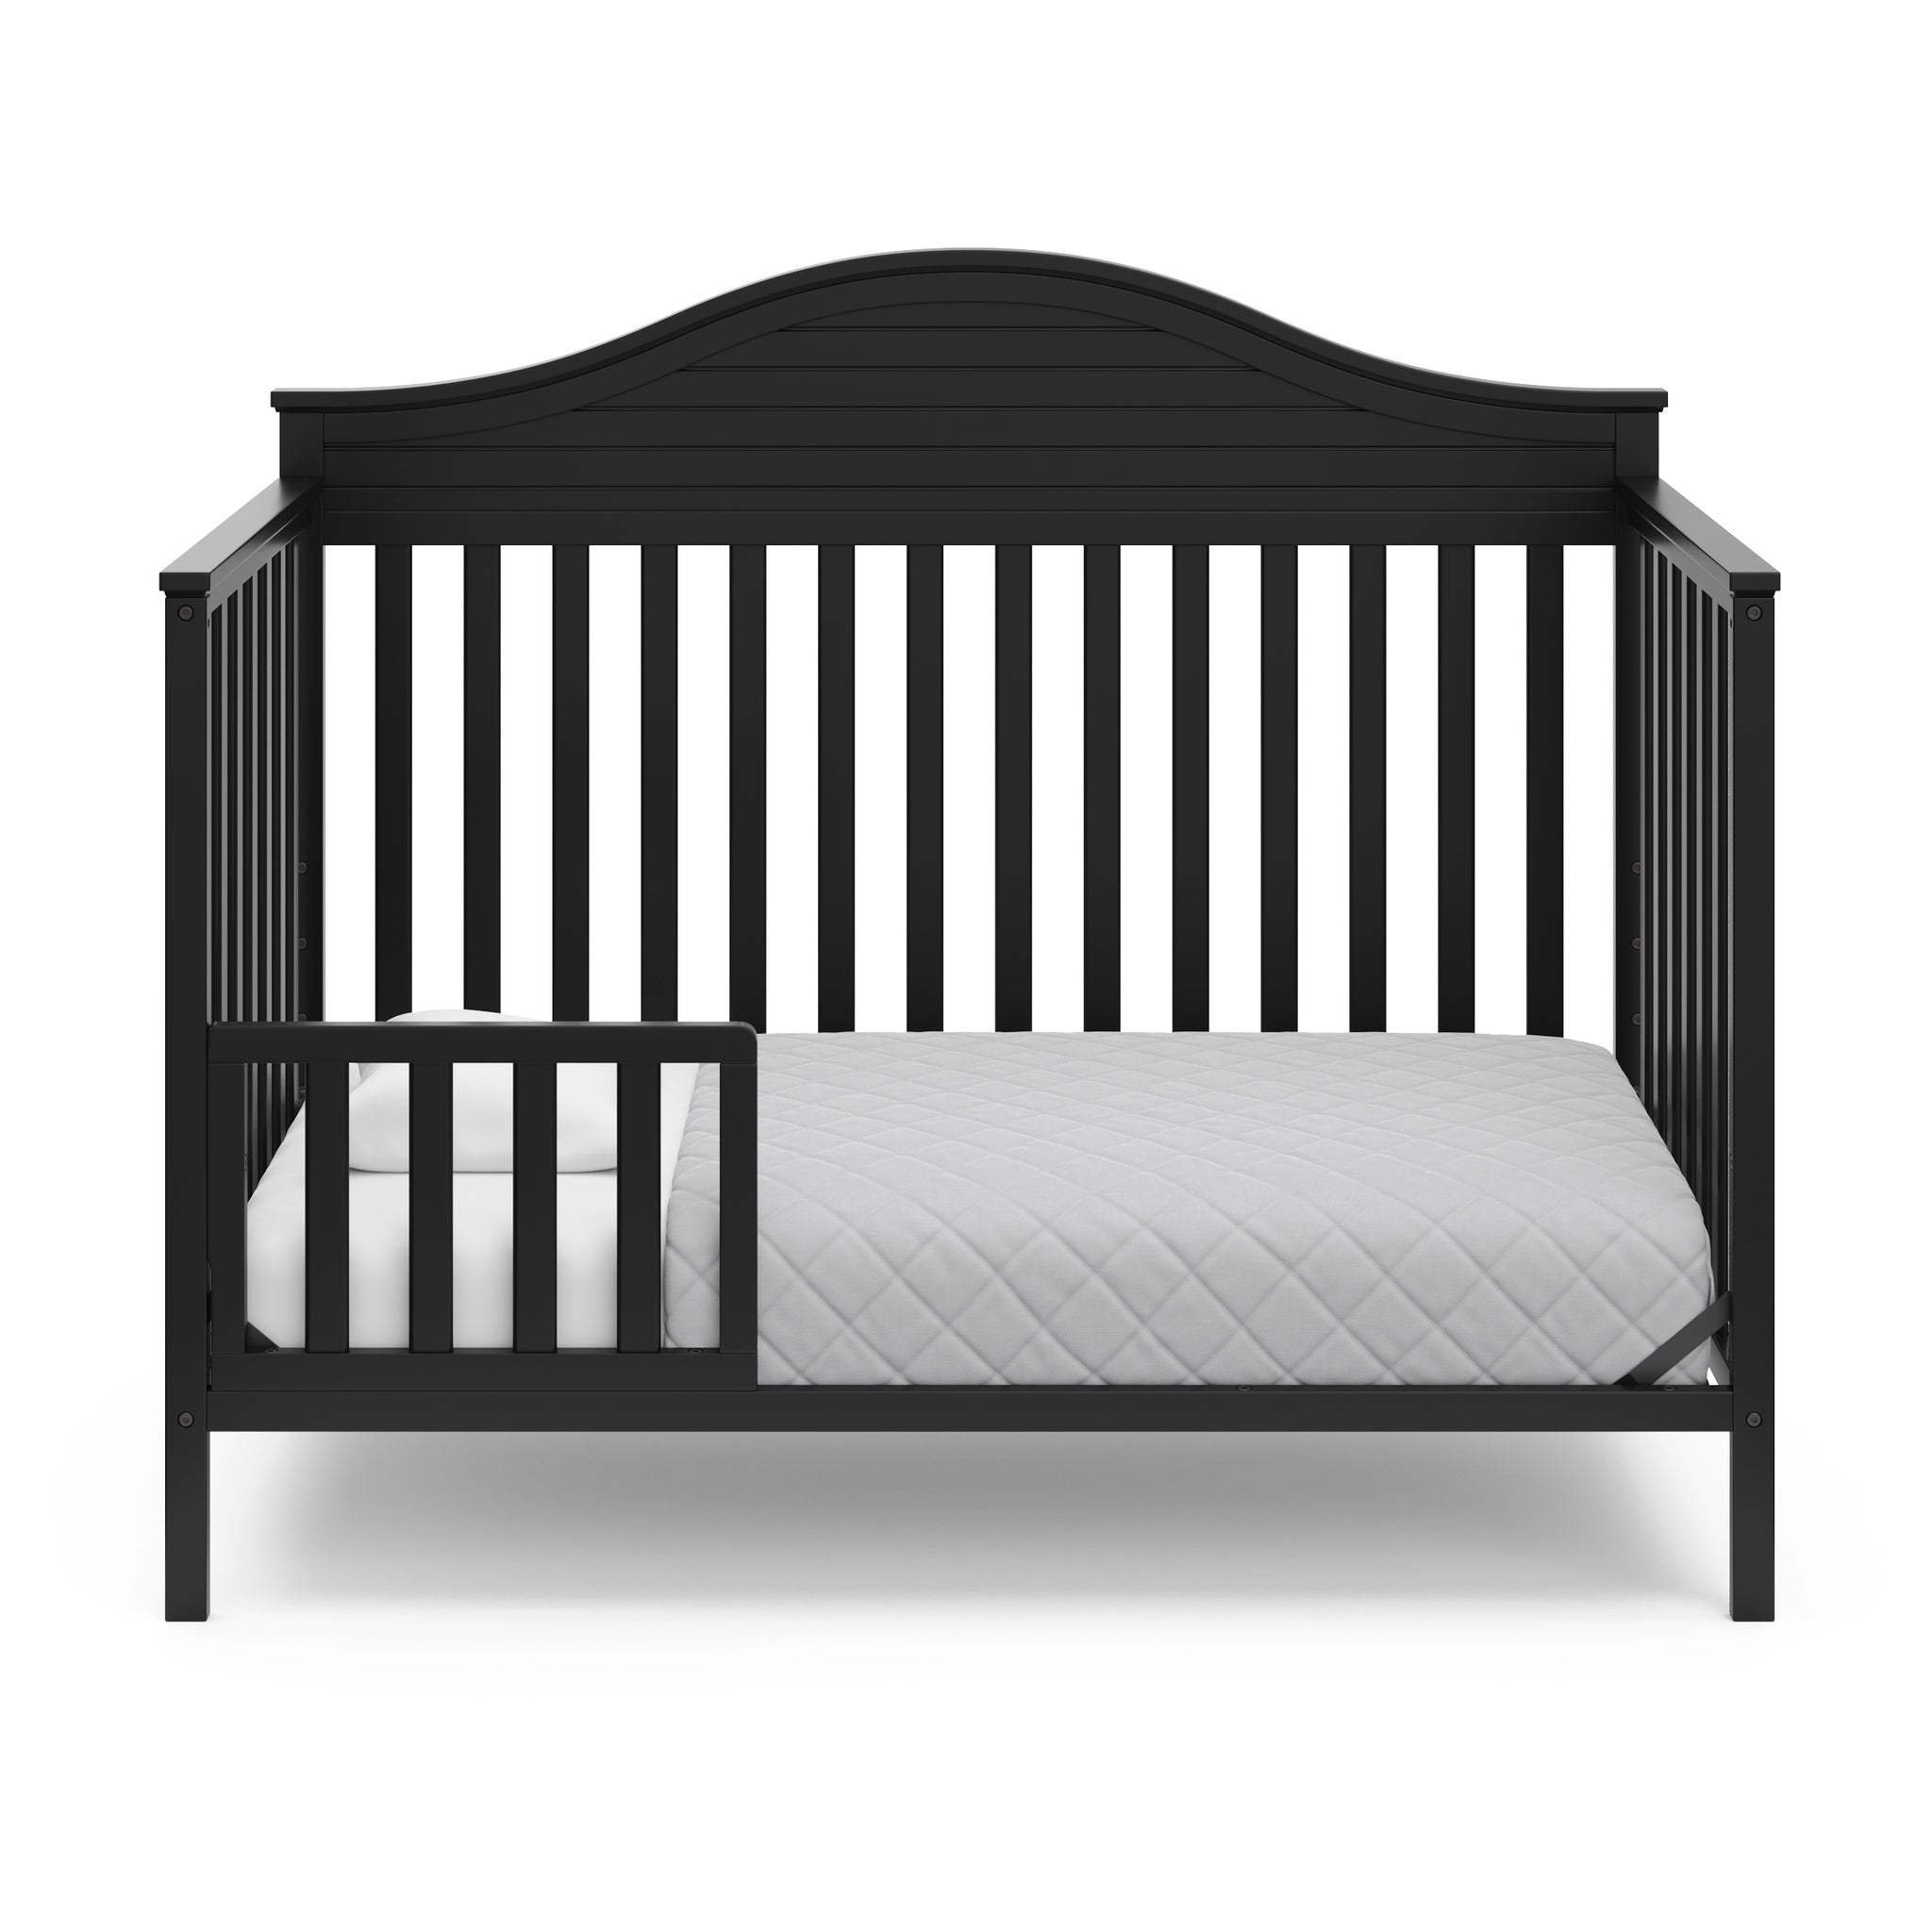 Black crib in toddler bed conversion with one safety guardrail